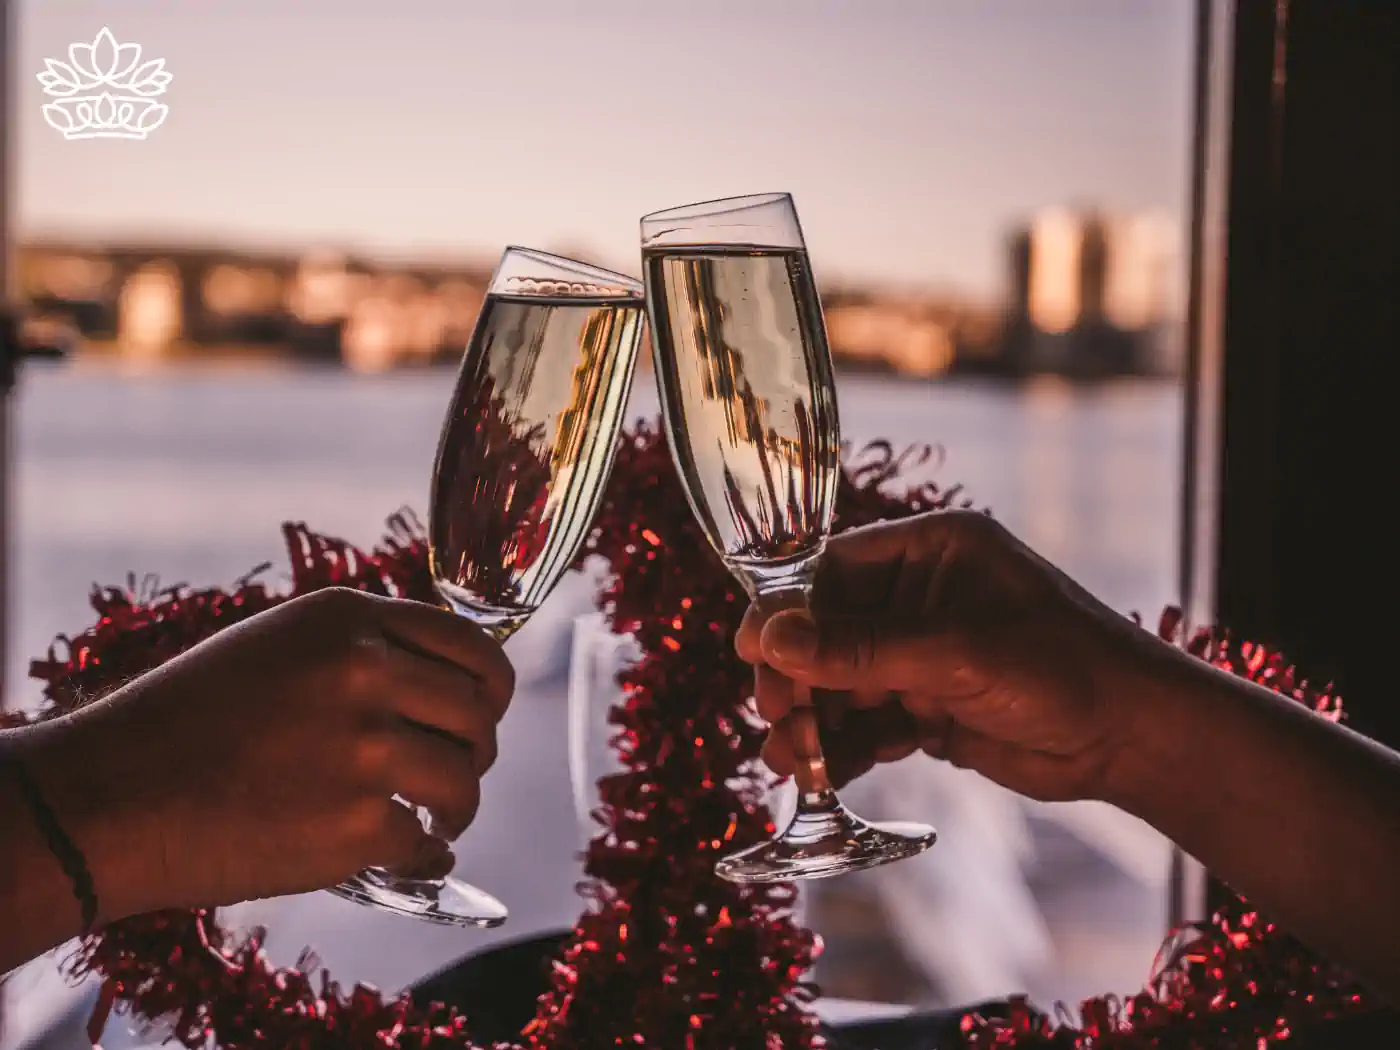 Two hands clinking champagne glasses adorned with red tinsel, celebrating Valentine's Day against a backdrop of a sunset cityscape. Fabulous Flowers and Gifts delivered with heart. Valentine's Day Flowers.